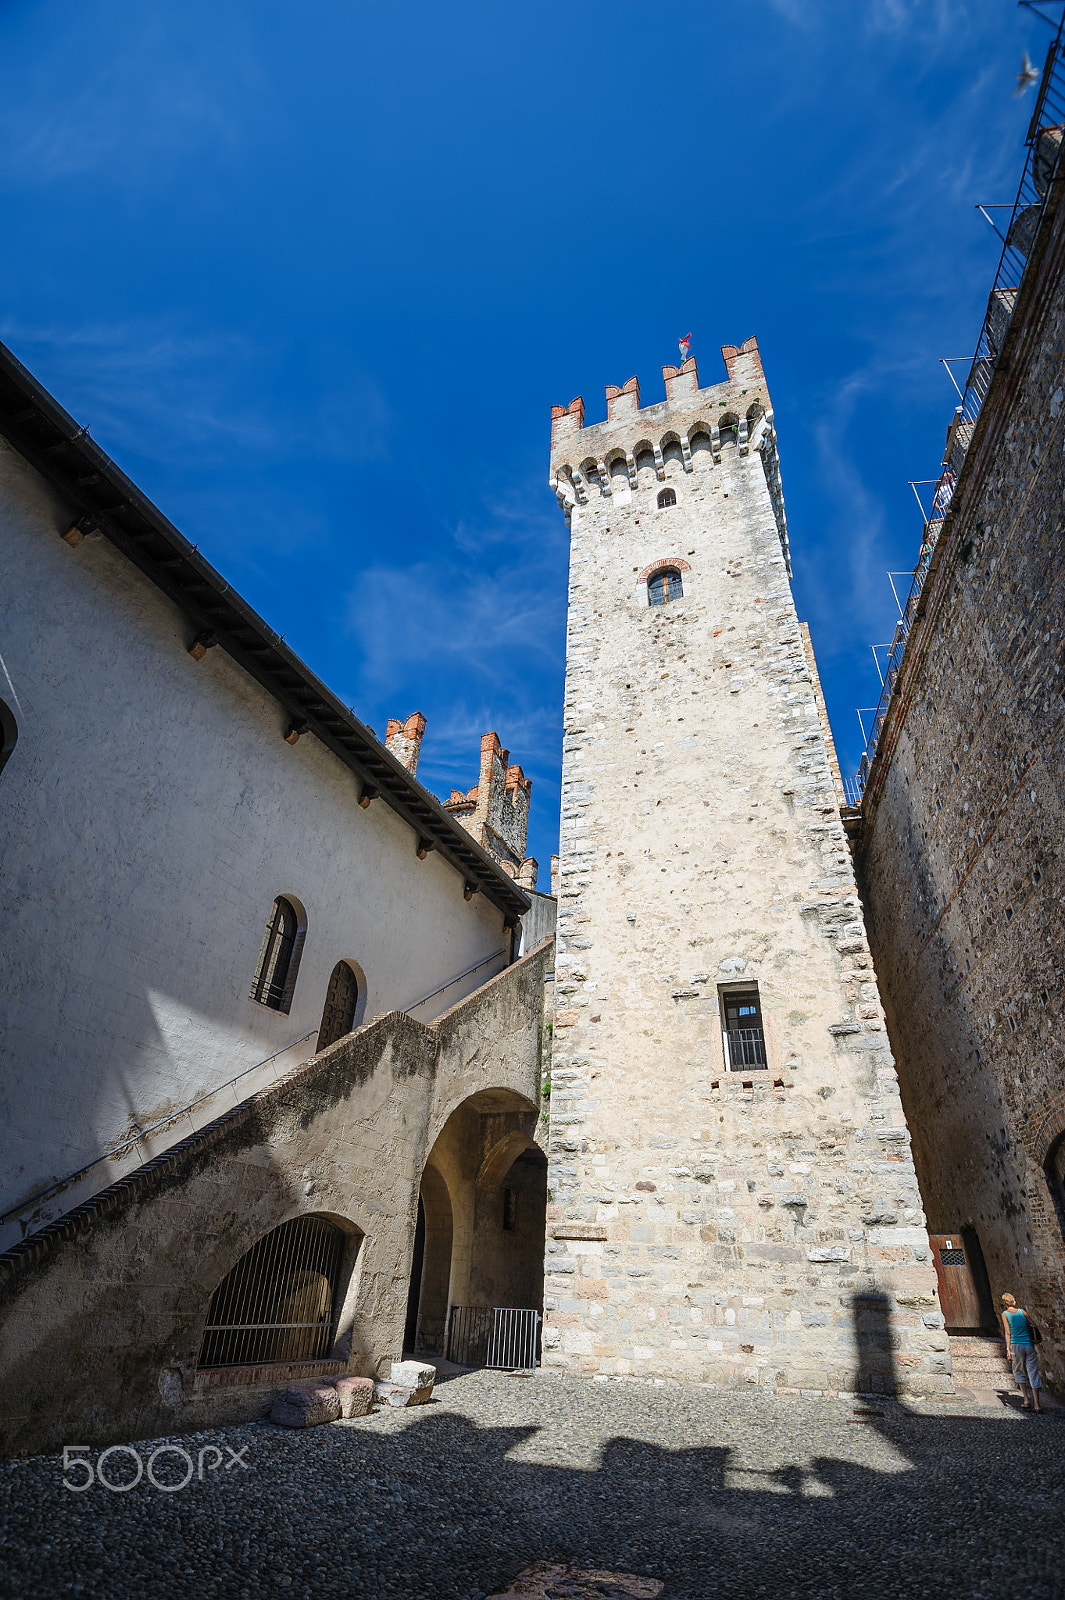 Nikon D700 sample photo. Ineror court of medieval castle scaliger in old town sirmione on lake lago di garda, northern italy photography